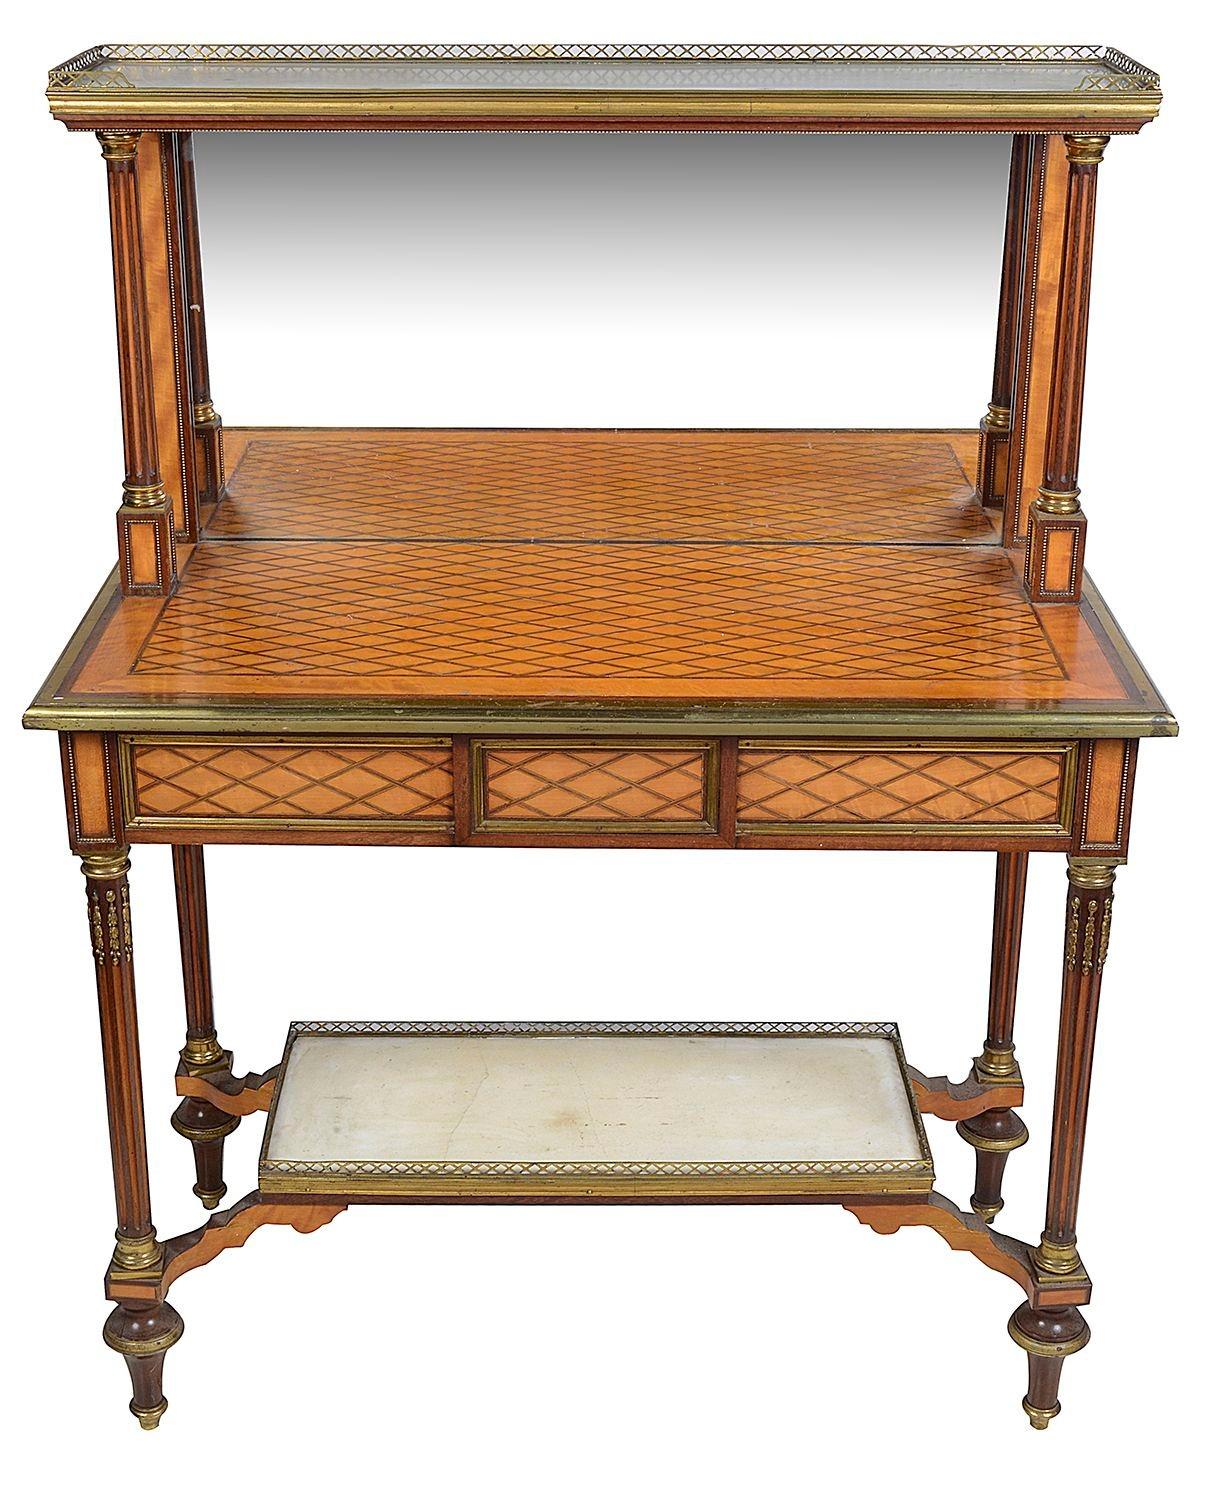 A fine quality pair of 19th Century Satinwood parquetry inlaid, marble topped side / console tables, with mirror backs, three quarter pierced brass gallery. wonderful parquetry inlay to the tops and frieze drawers. Supported on four ormolu mounted